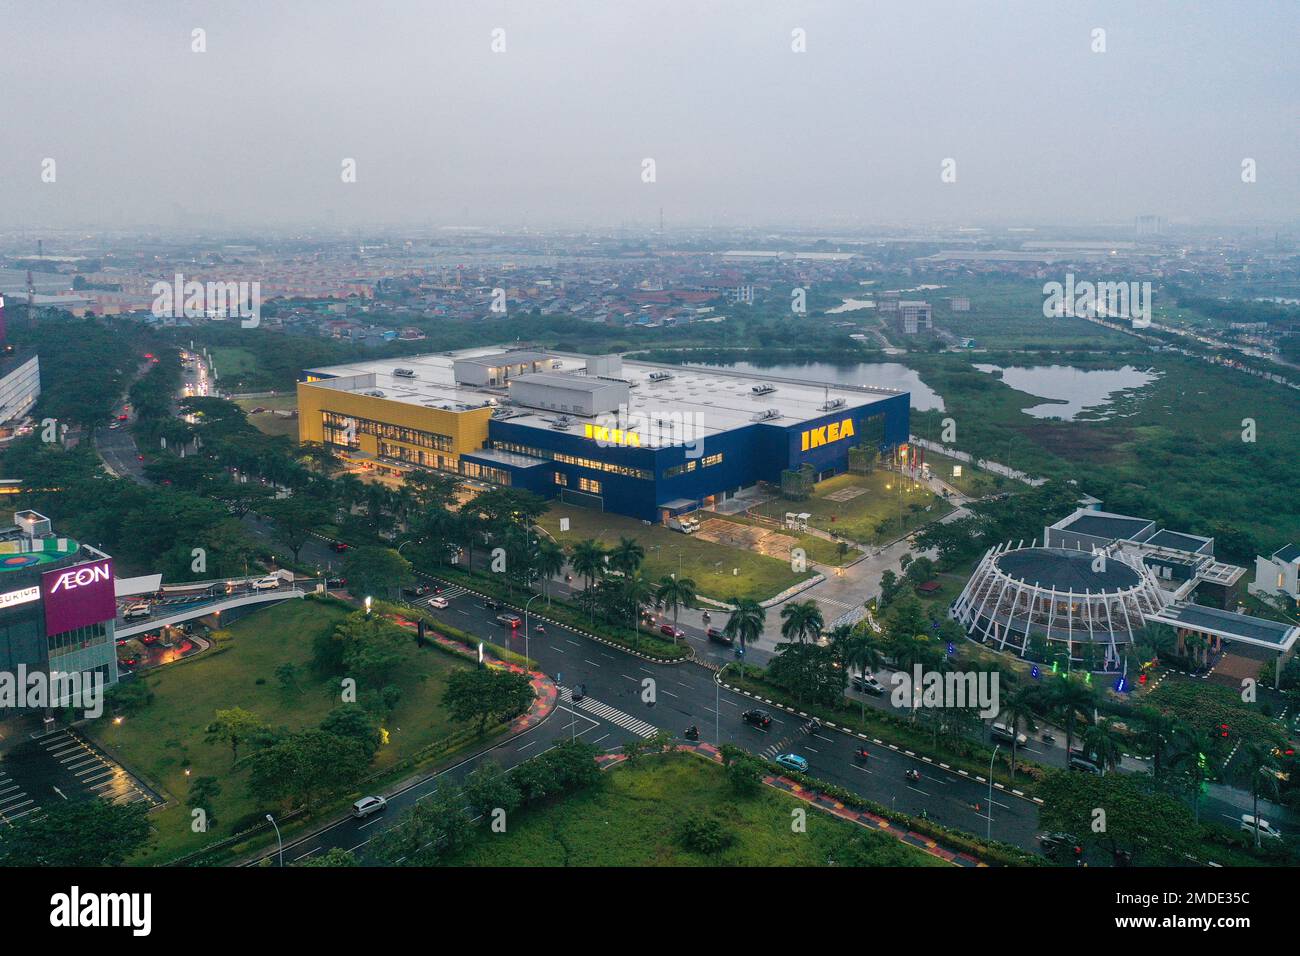 Aerial view of New IKEA Store Jakarta Garden City, AEON is a Largest retailer of ready-to-assemble or flat-pack furniture with noise cloud. Jakarta, J Stock Photo